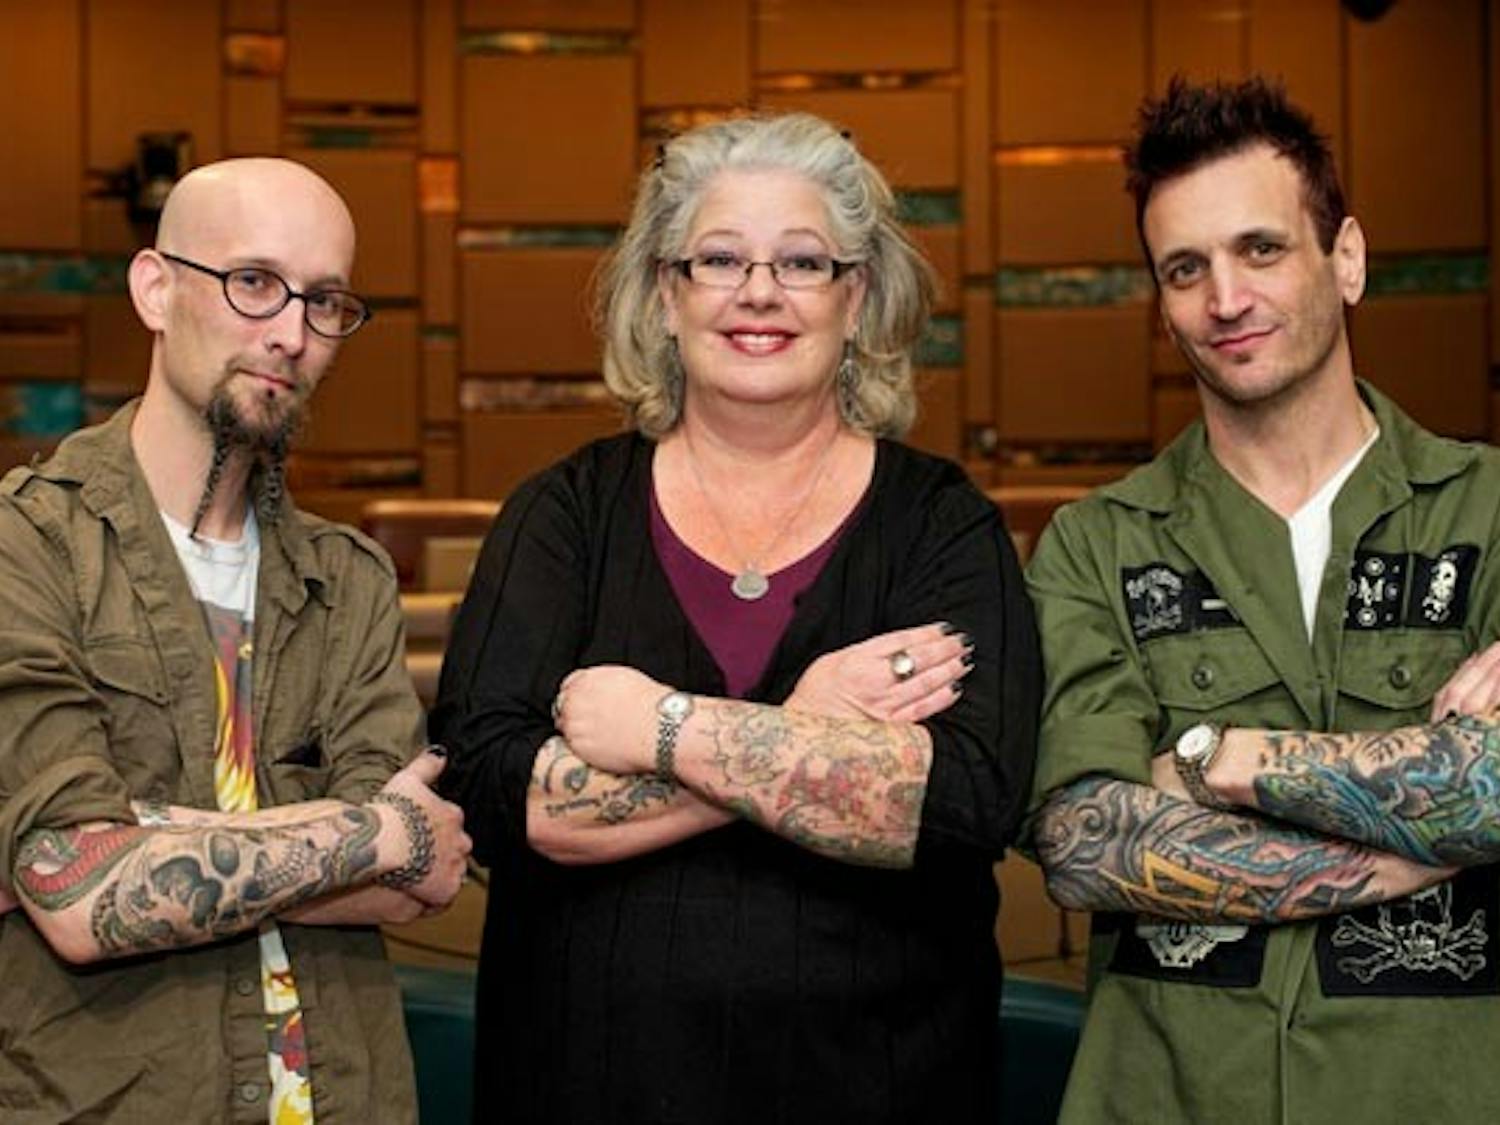 SELF EXPRESSION: Manger Chris Parrish, left, Jane Adler and owner Mark Walters of Living Canvas Tattoos proudly display their work in the Tempe City Council Chambers, after hosting a public forum on tattoo work on Wednesday. (Photo by Michael Arellano)